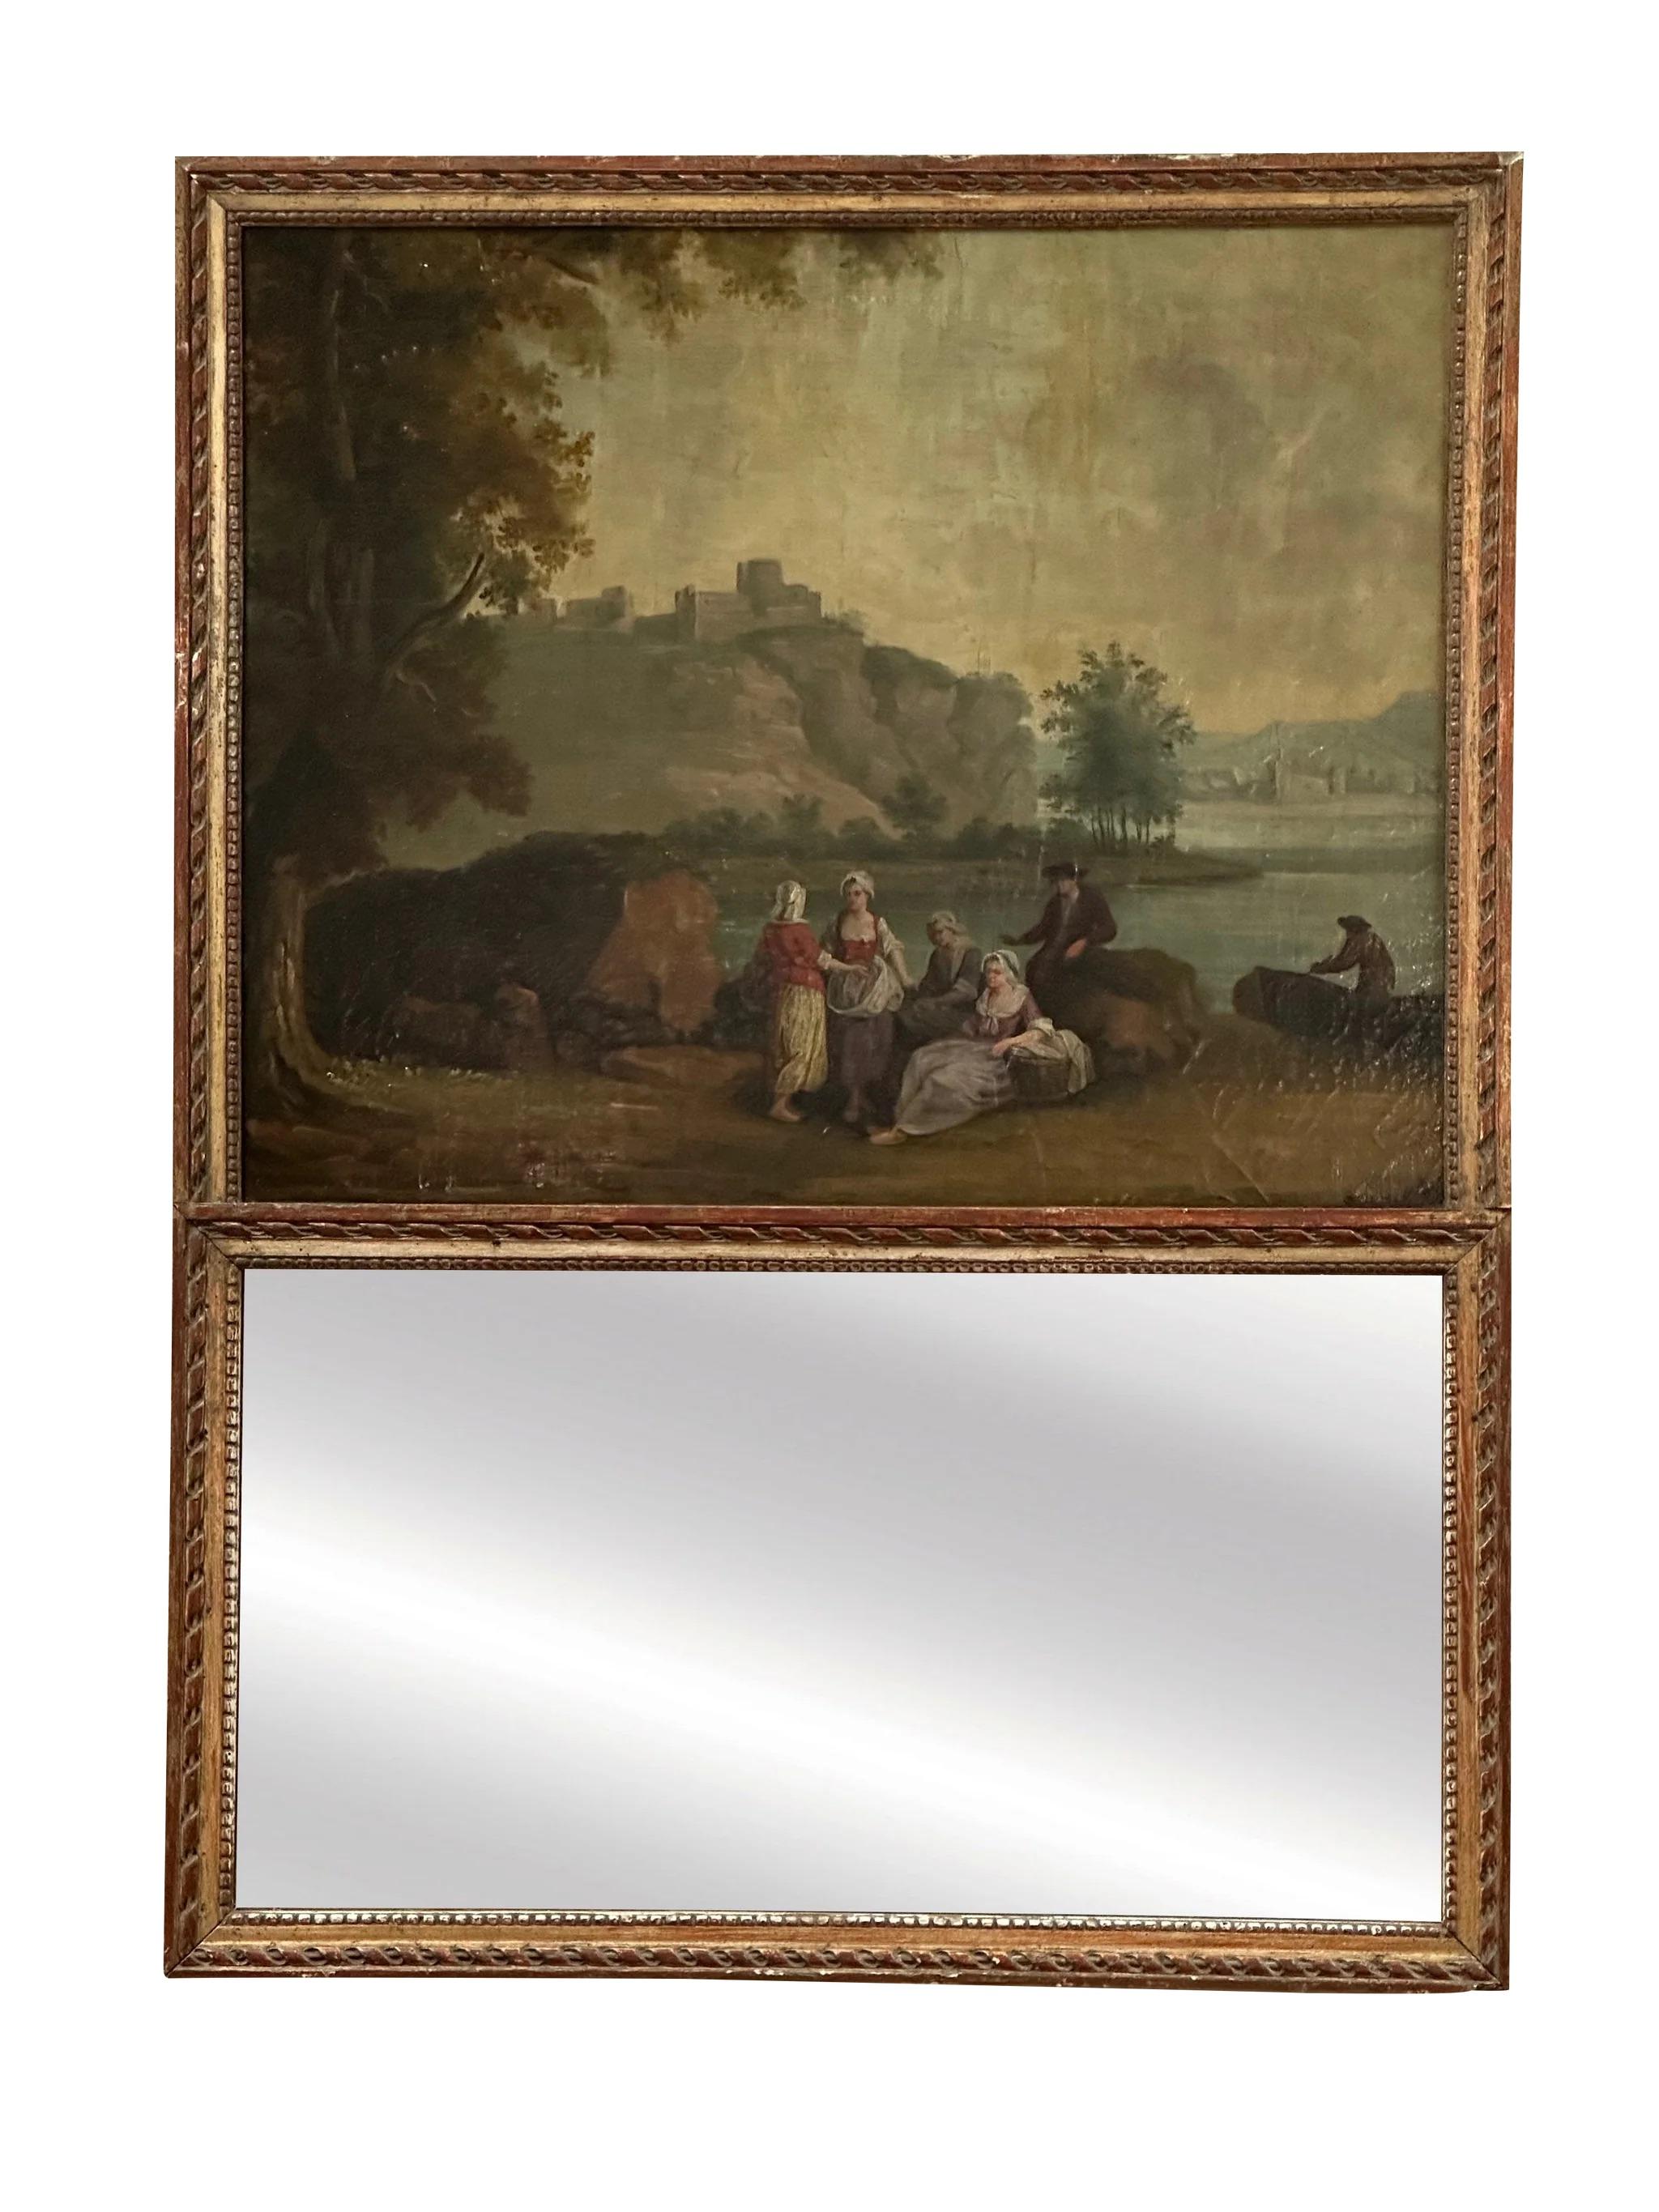 18th Century 18th-19th Century French Trumeau Mirror, Manner of Vernet